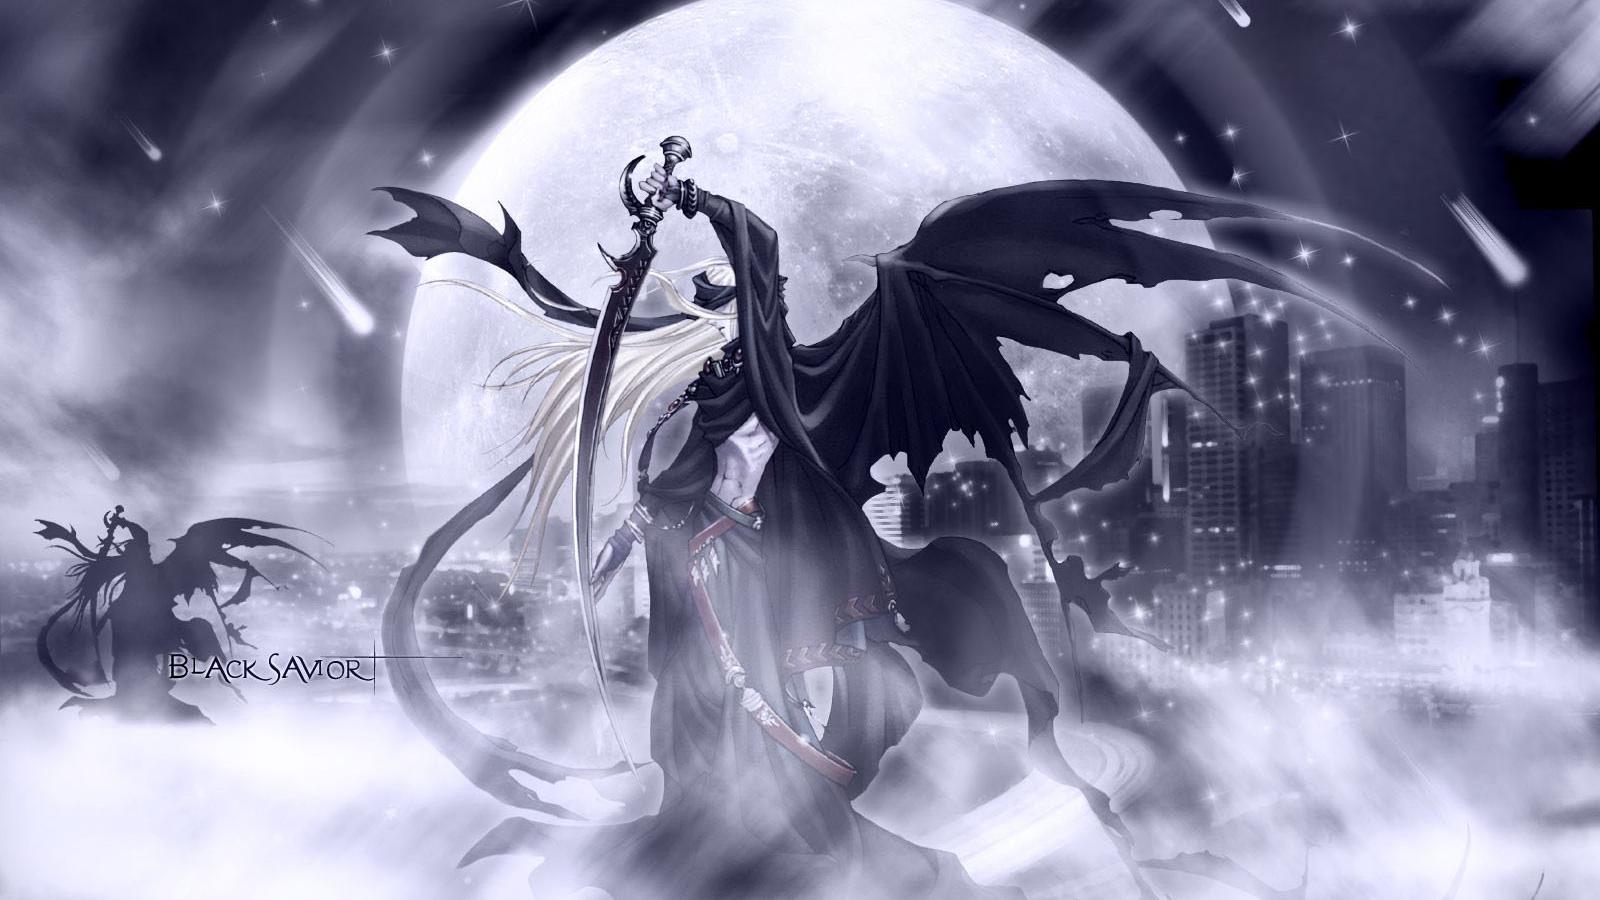 anime wallpaper 1600x900,cg artwork,fictional character,black and white,illustration,mythical creature